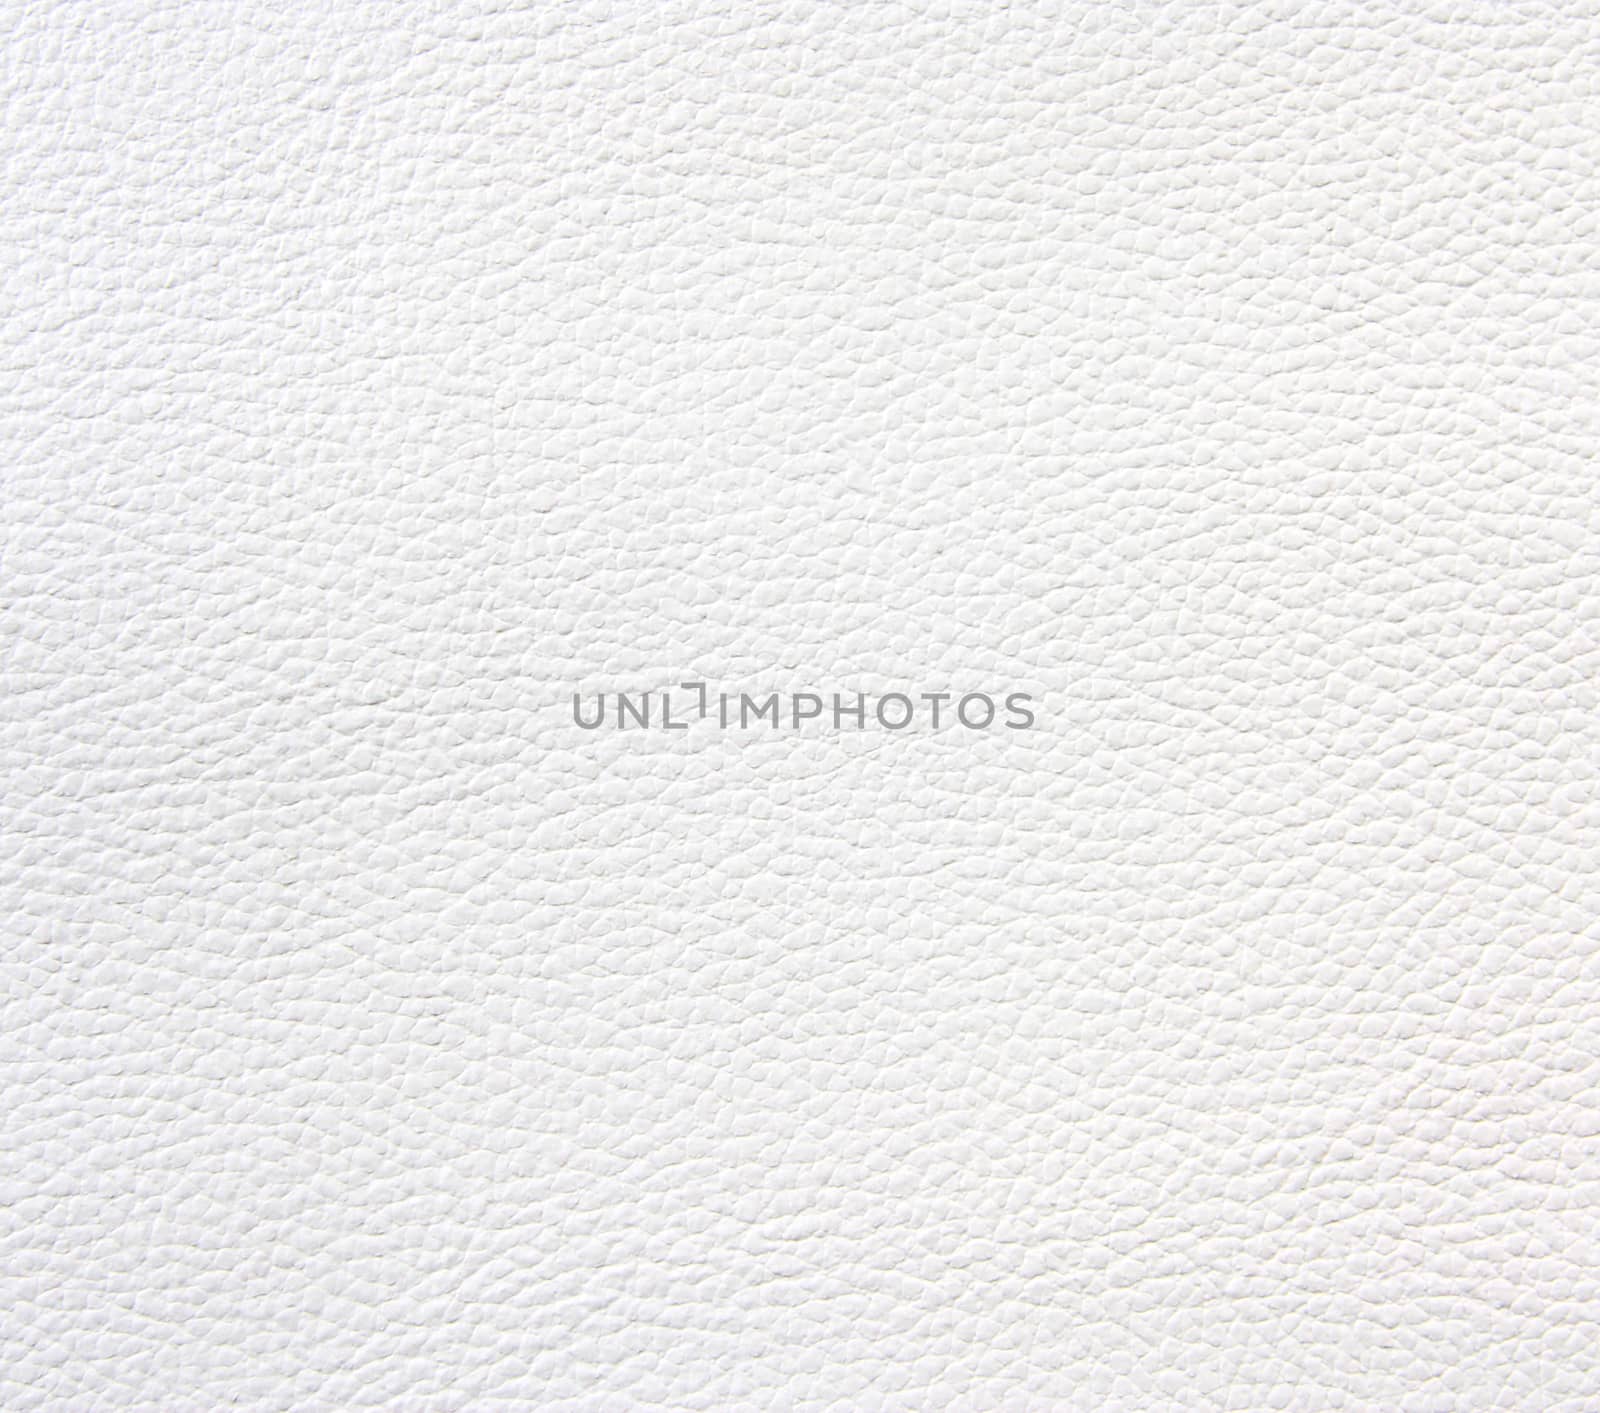 Texture of White leather by wyoosumran